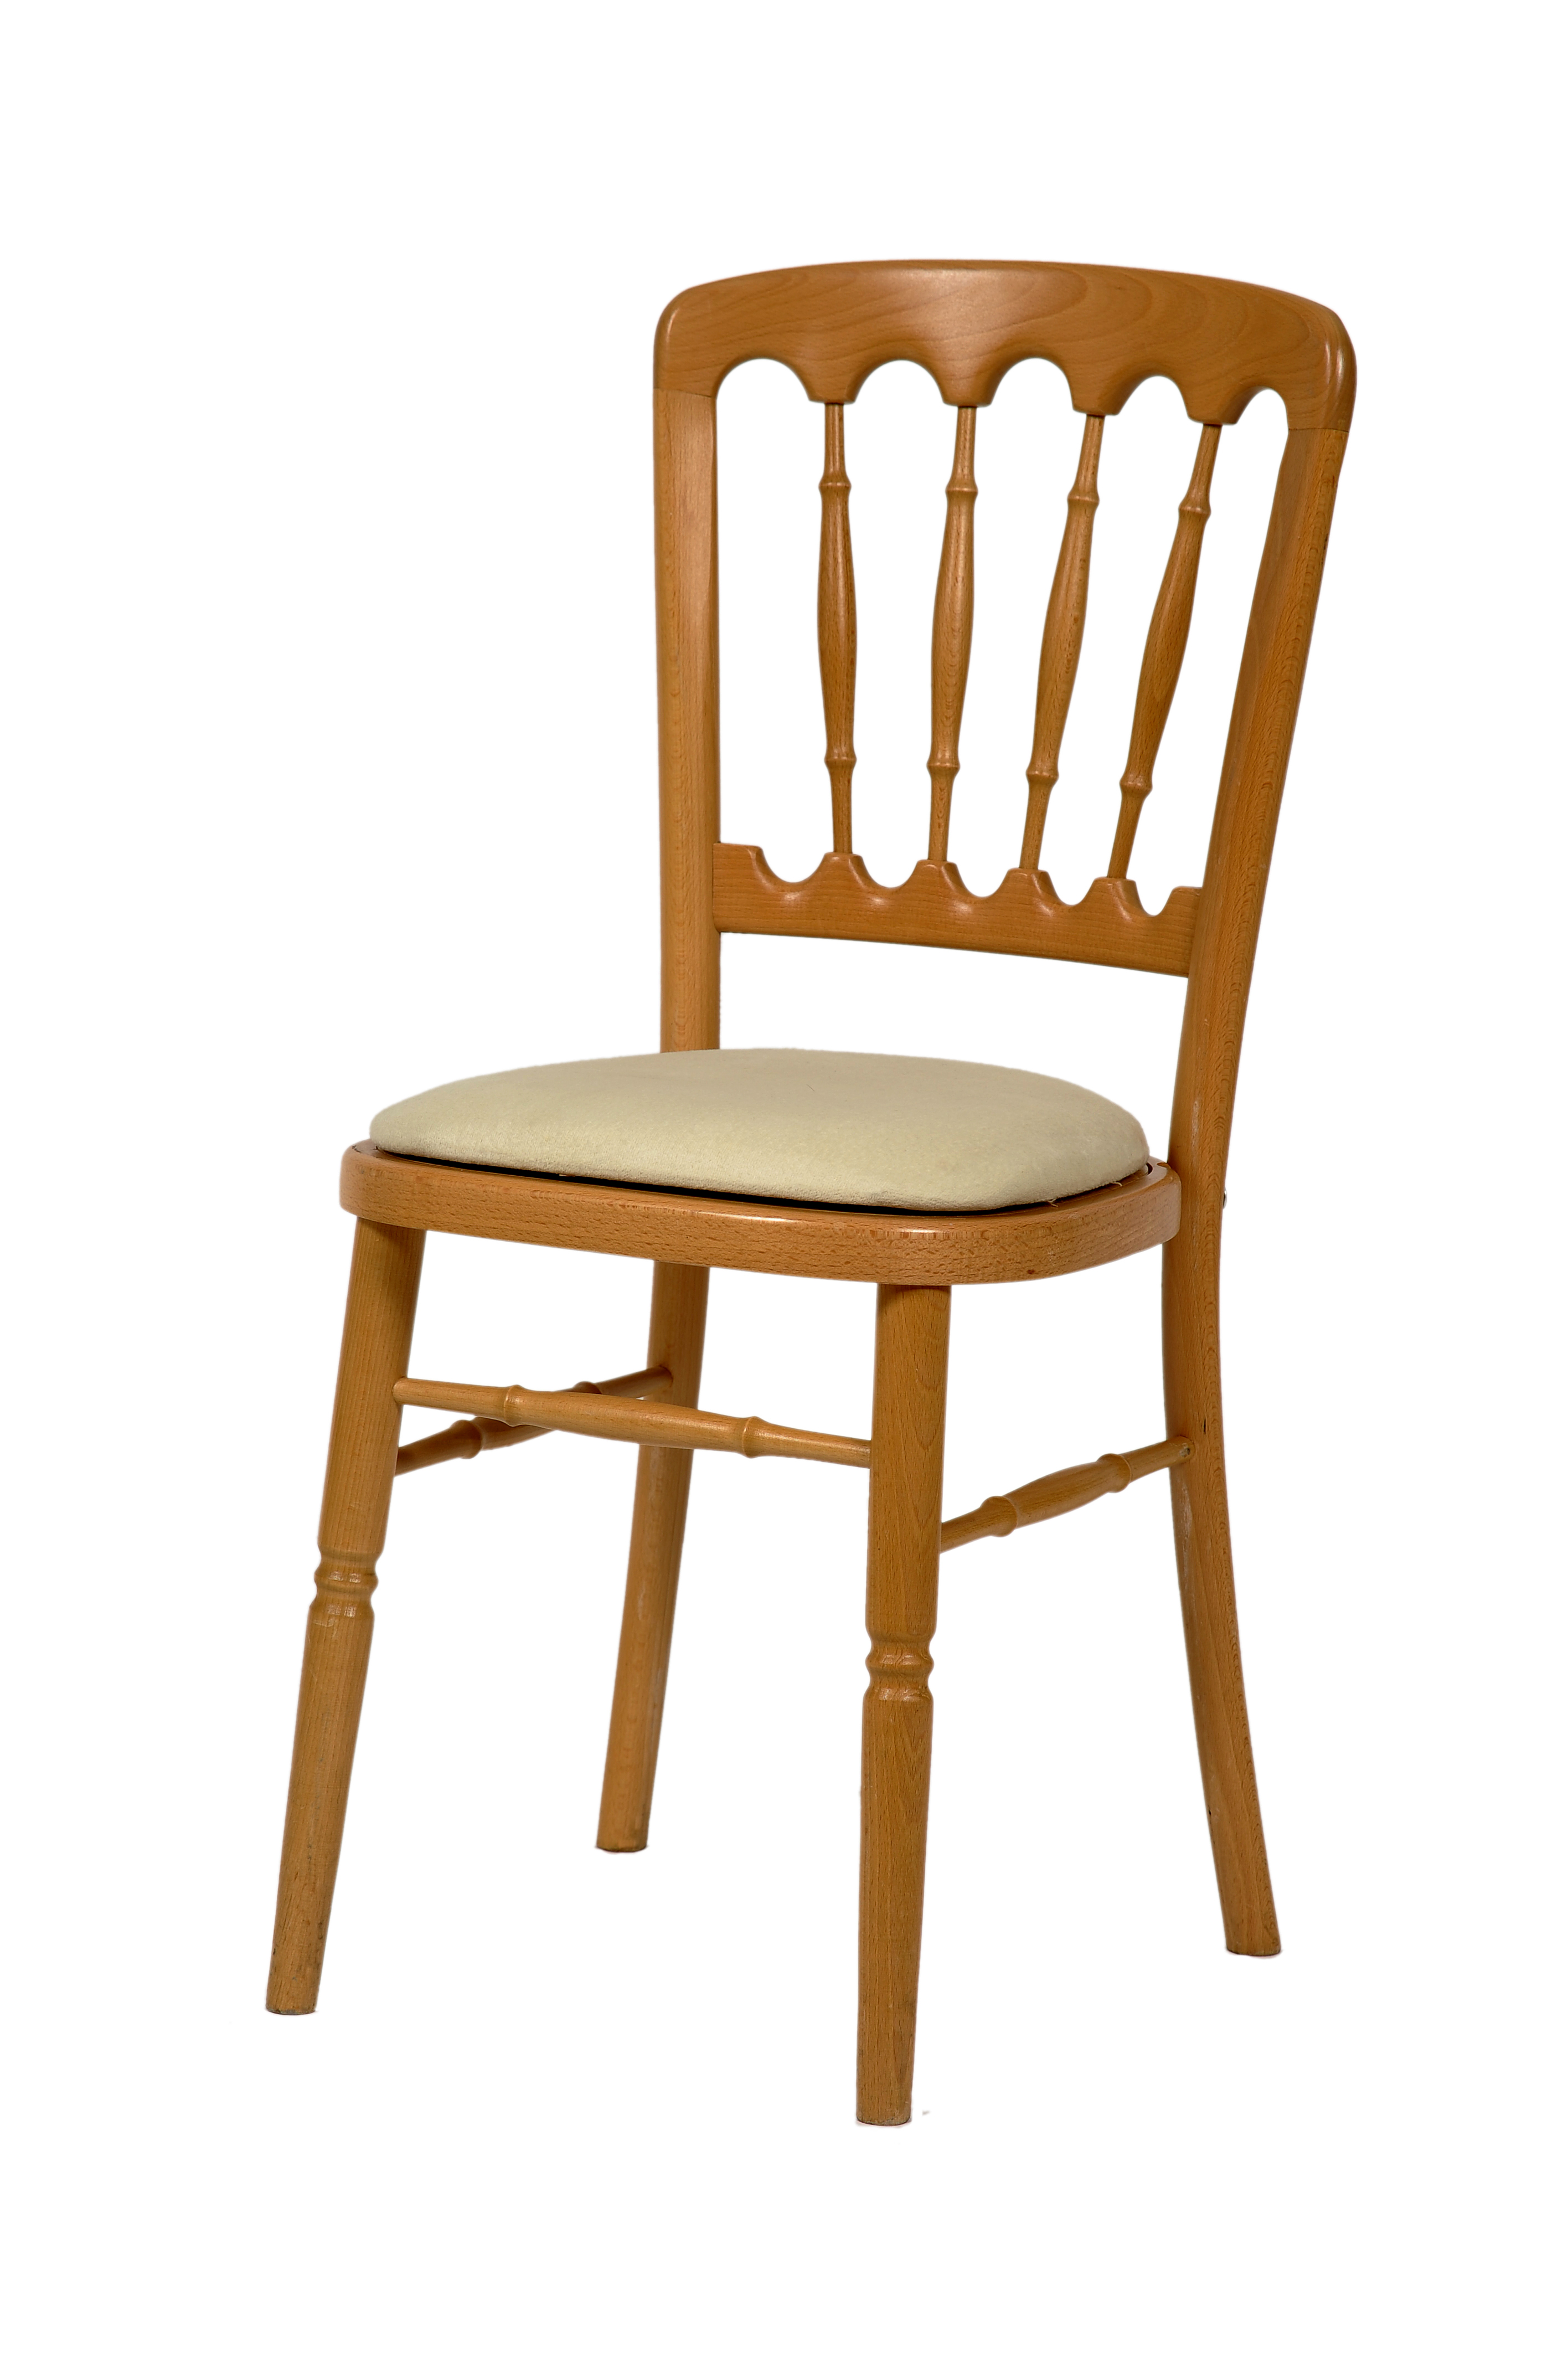 category_F1106 - Banquet Chair Natural